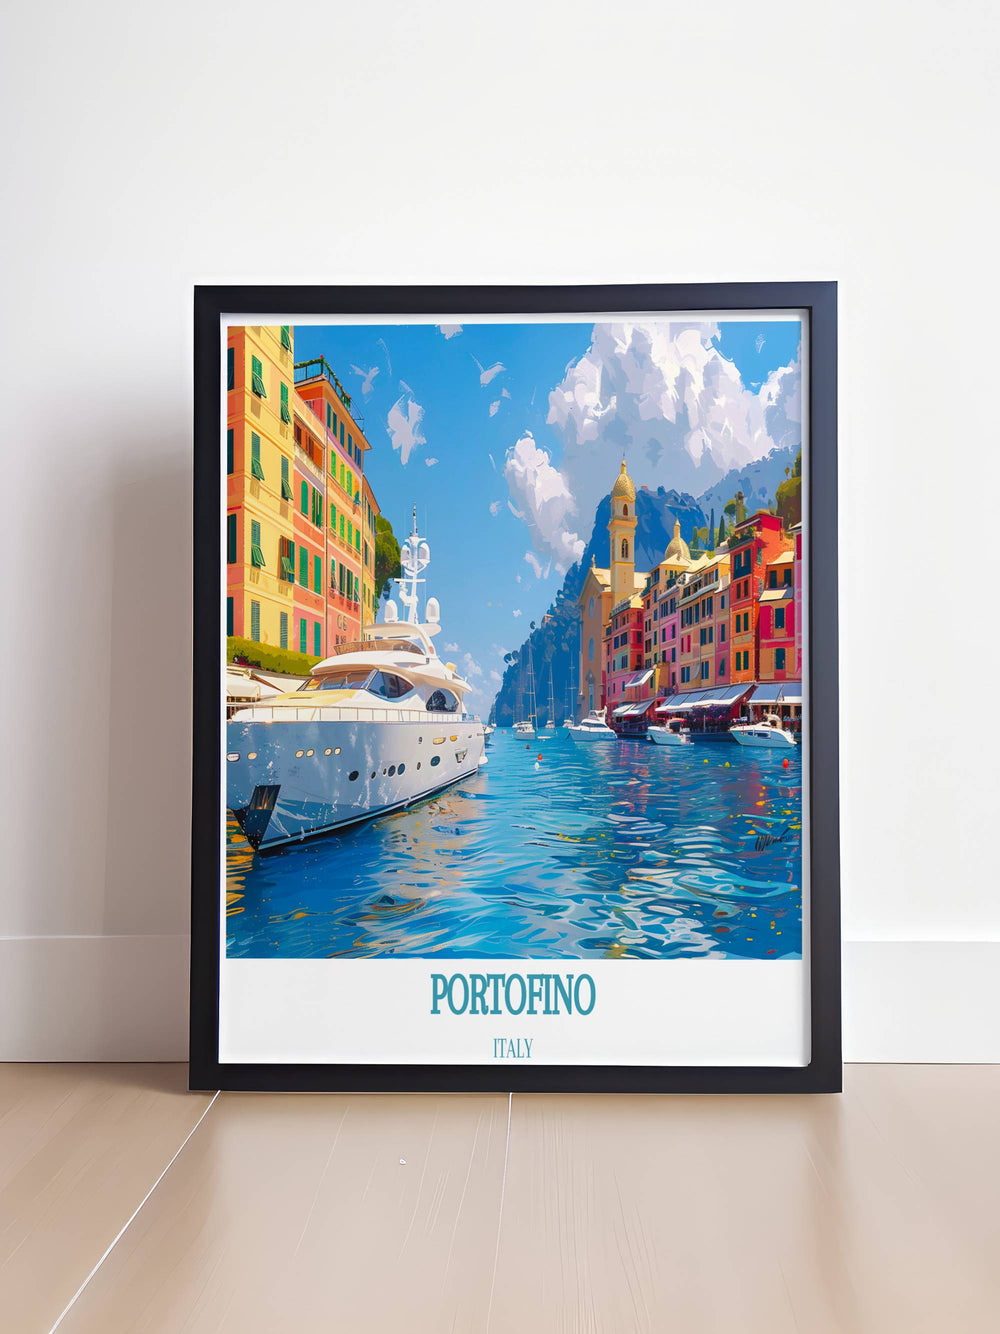 Experience the elegance of Portofino with our Framed Art collection, featuring stunning scenes of the villages unique architecture and natural beauty.